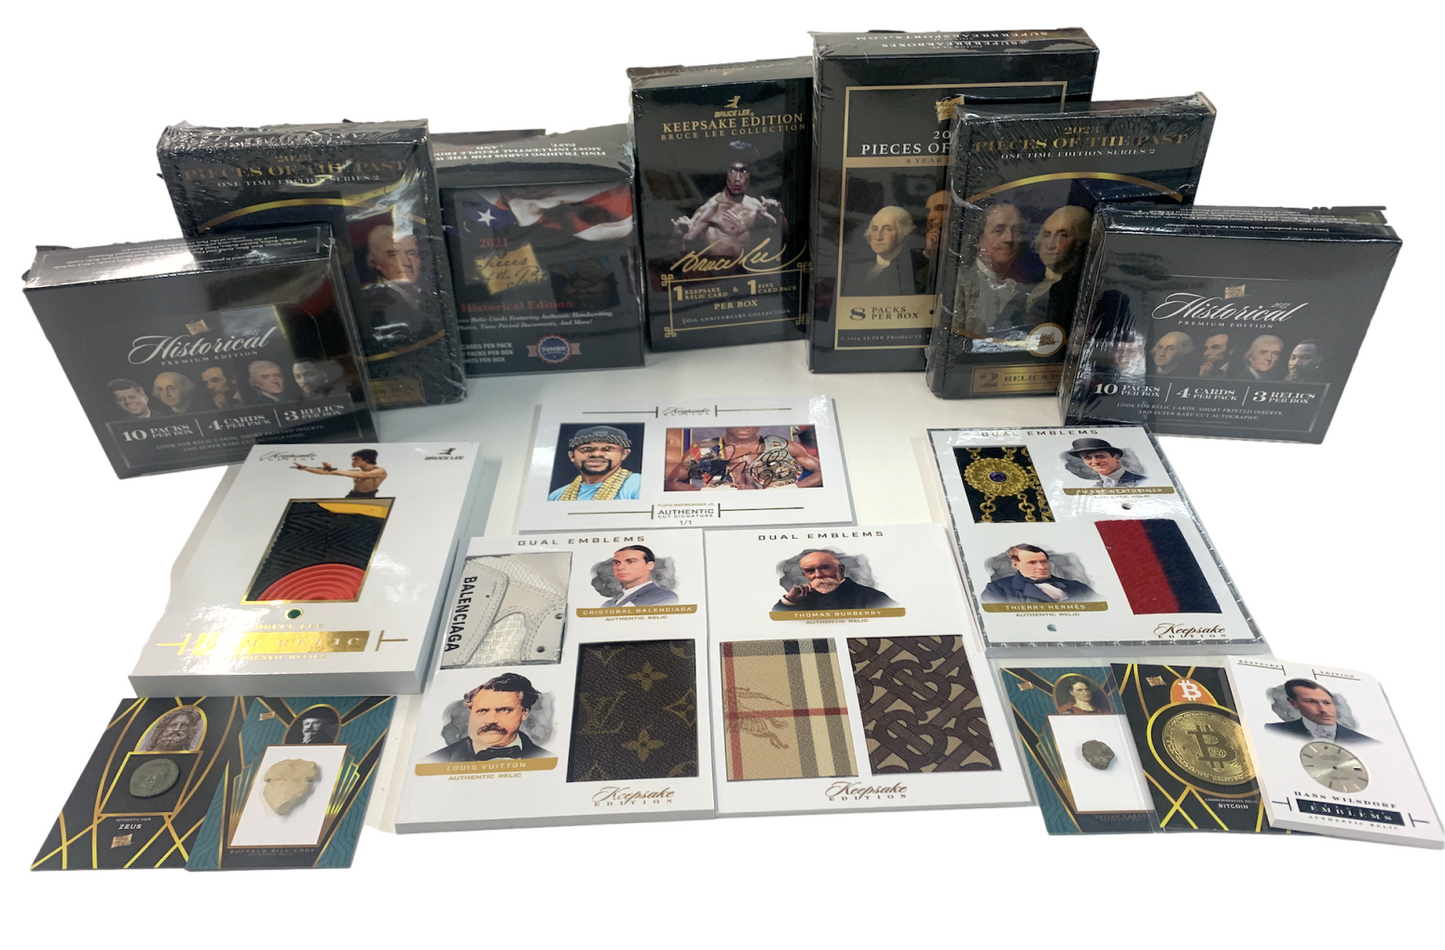 4 Case May Dealer Special - WIN A FREE CASE OF THE BAR CUT AUTOGRAPH!